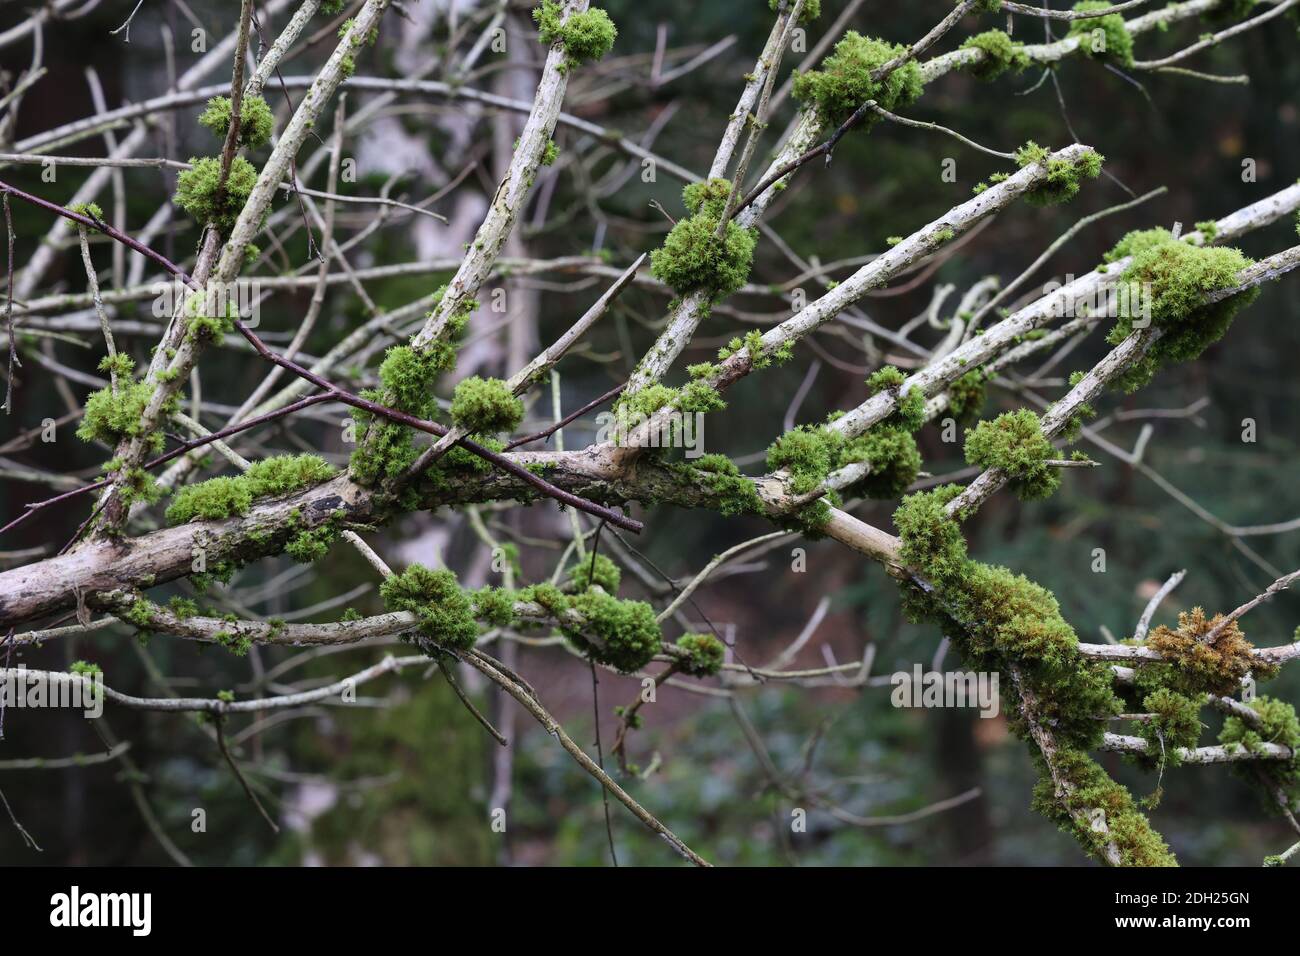 A moss and lichens grow on tree branches in the forest Stock Photo